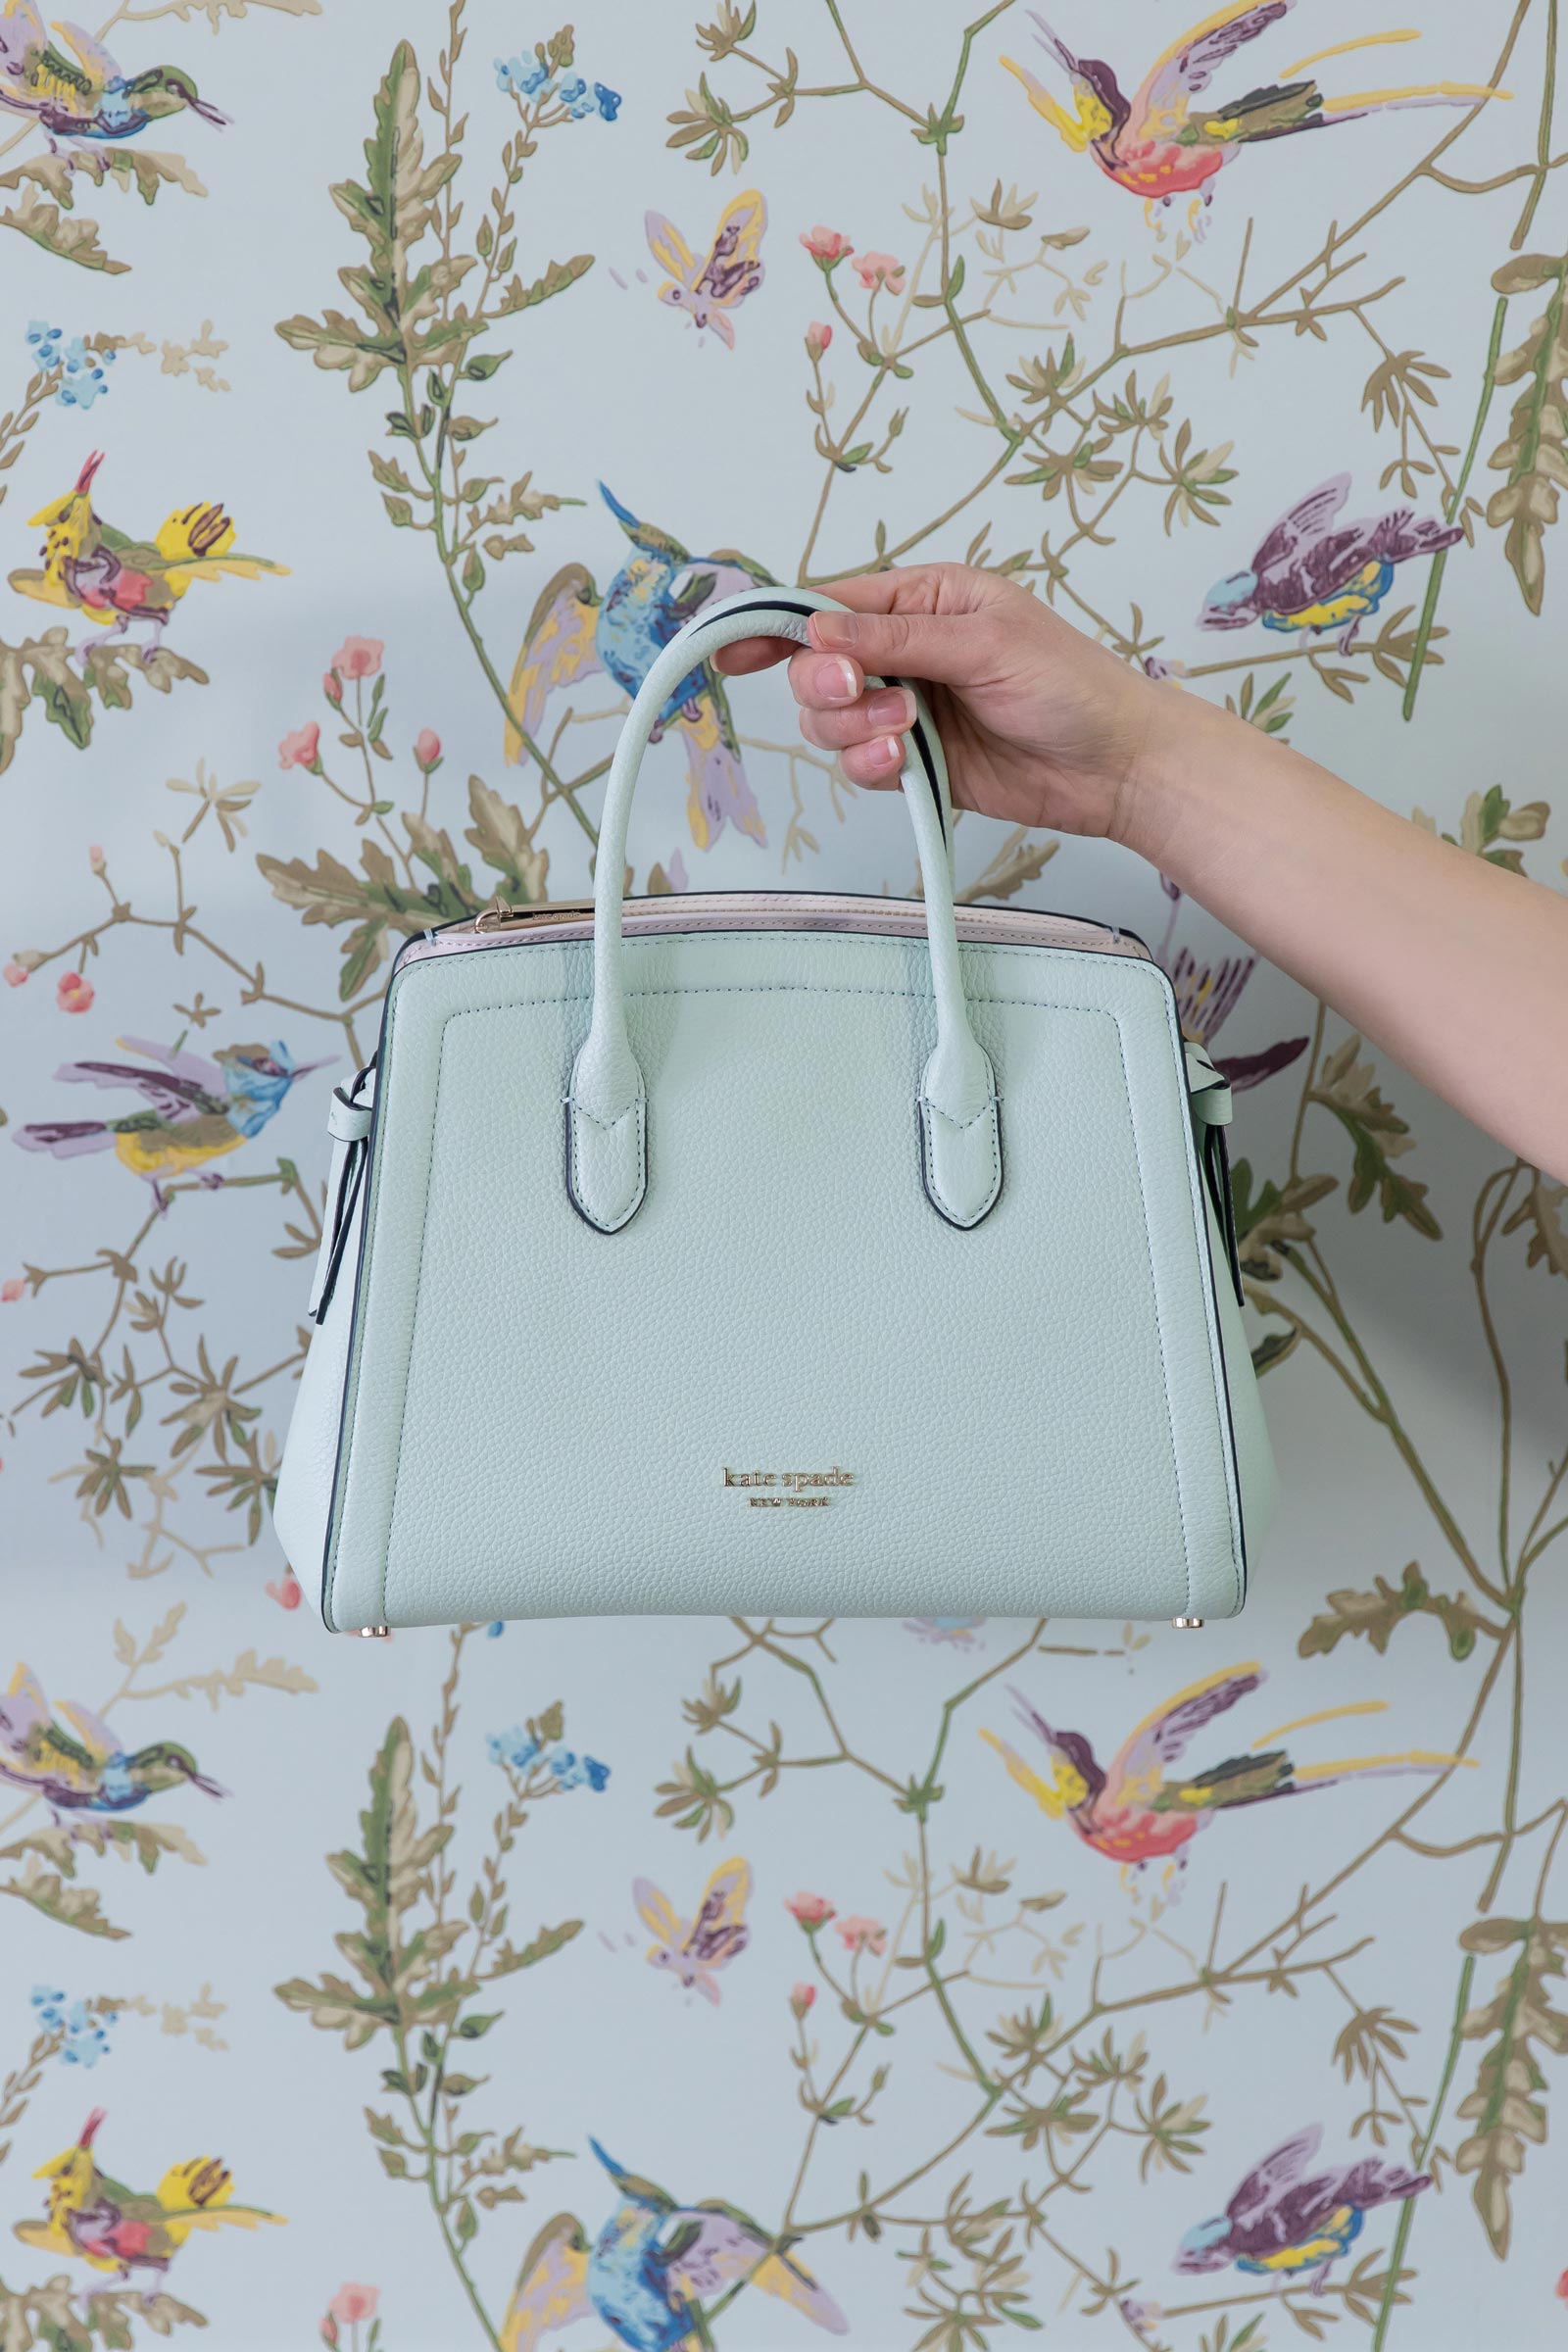 My Candid Review of the kate spade knott satchel - Style Charade